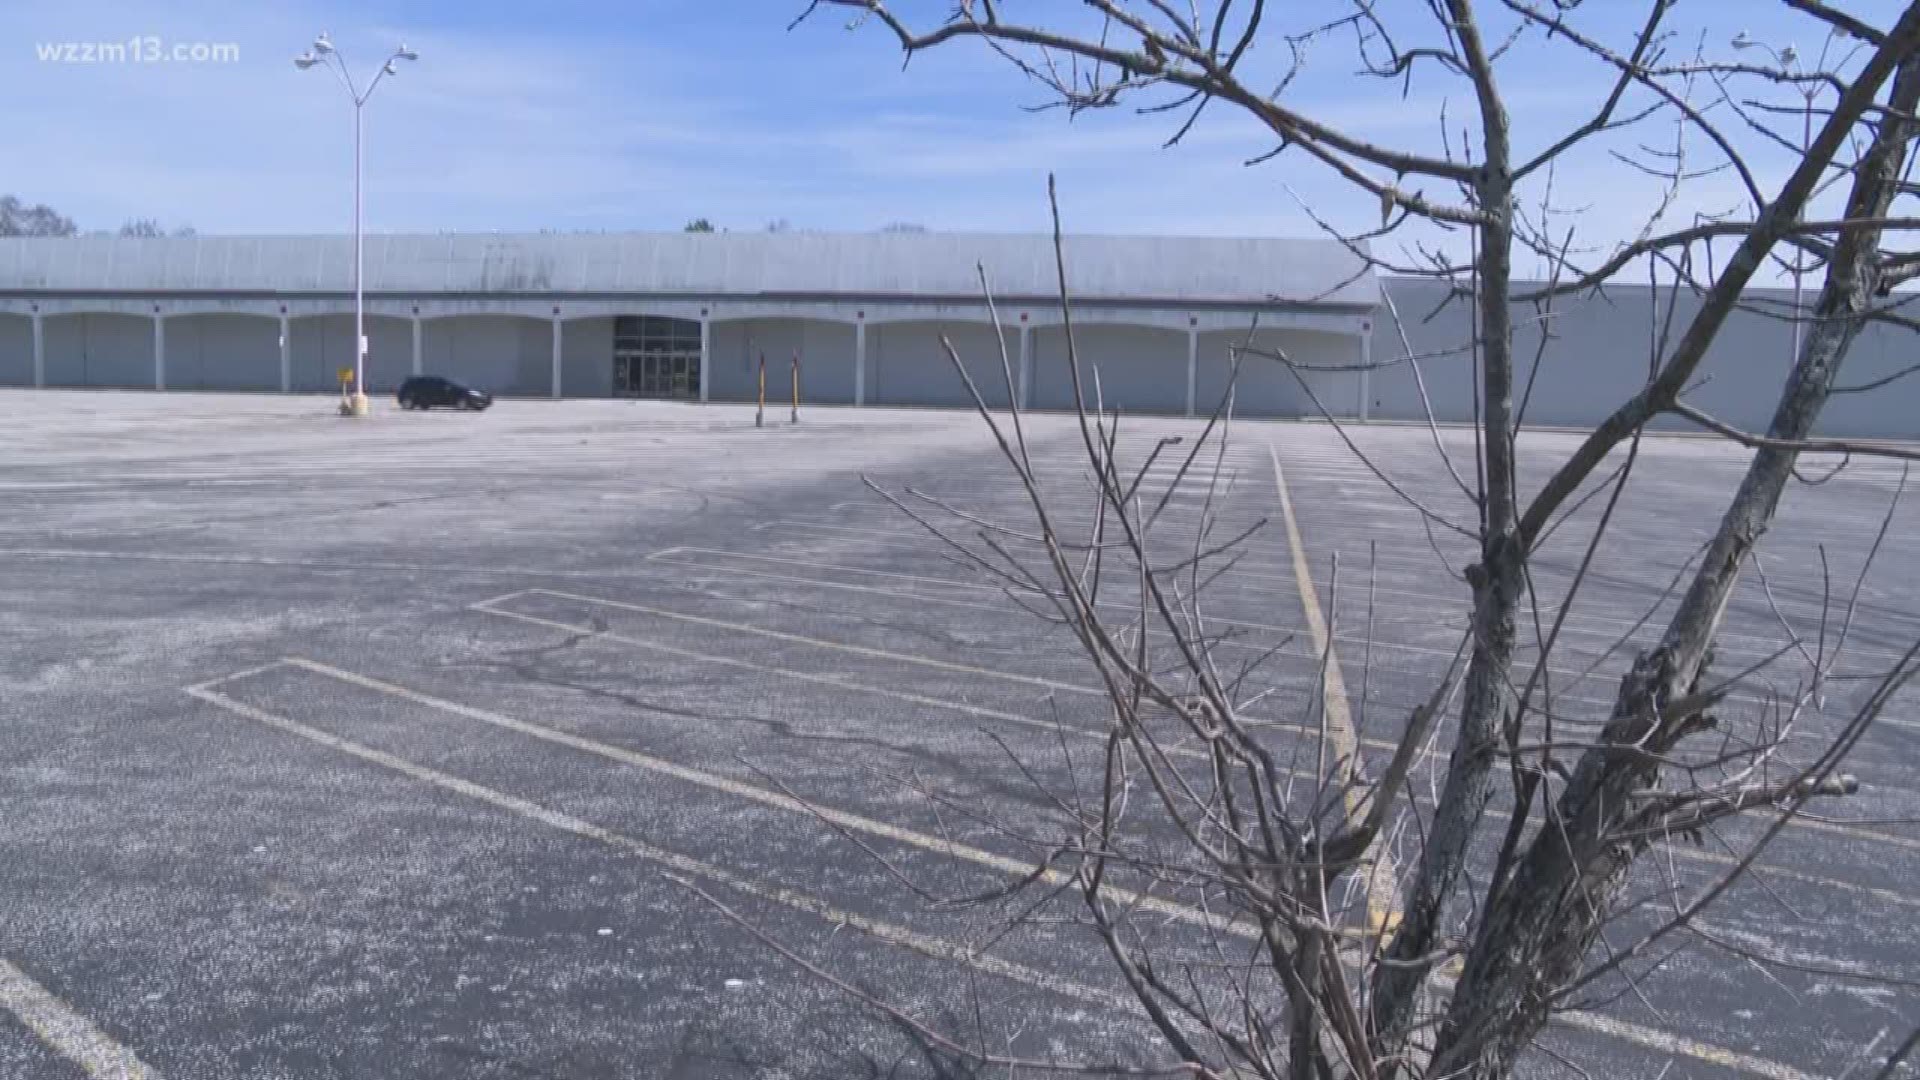 Tuesday night the Norton Shores Planning Commission will consider a plan to demolish the vacant K-Mart to make room for a health care building and apartment complex.